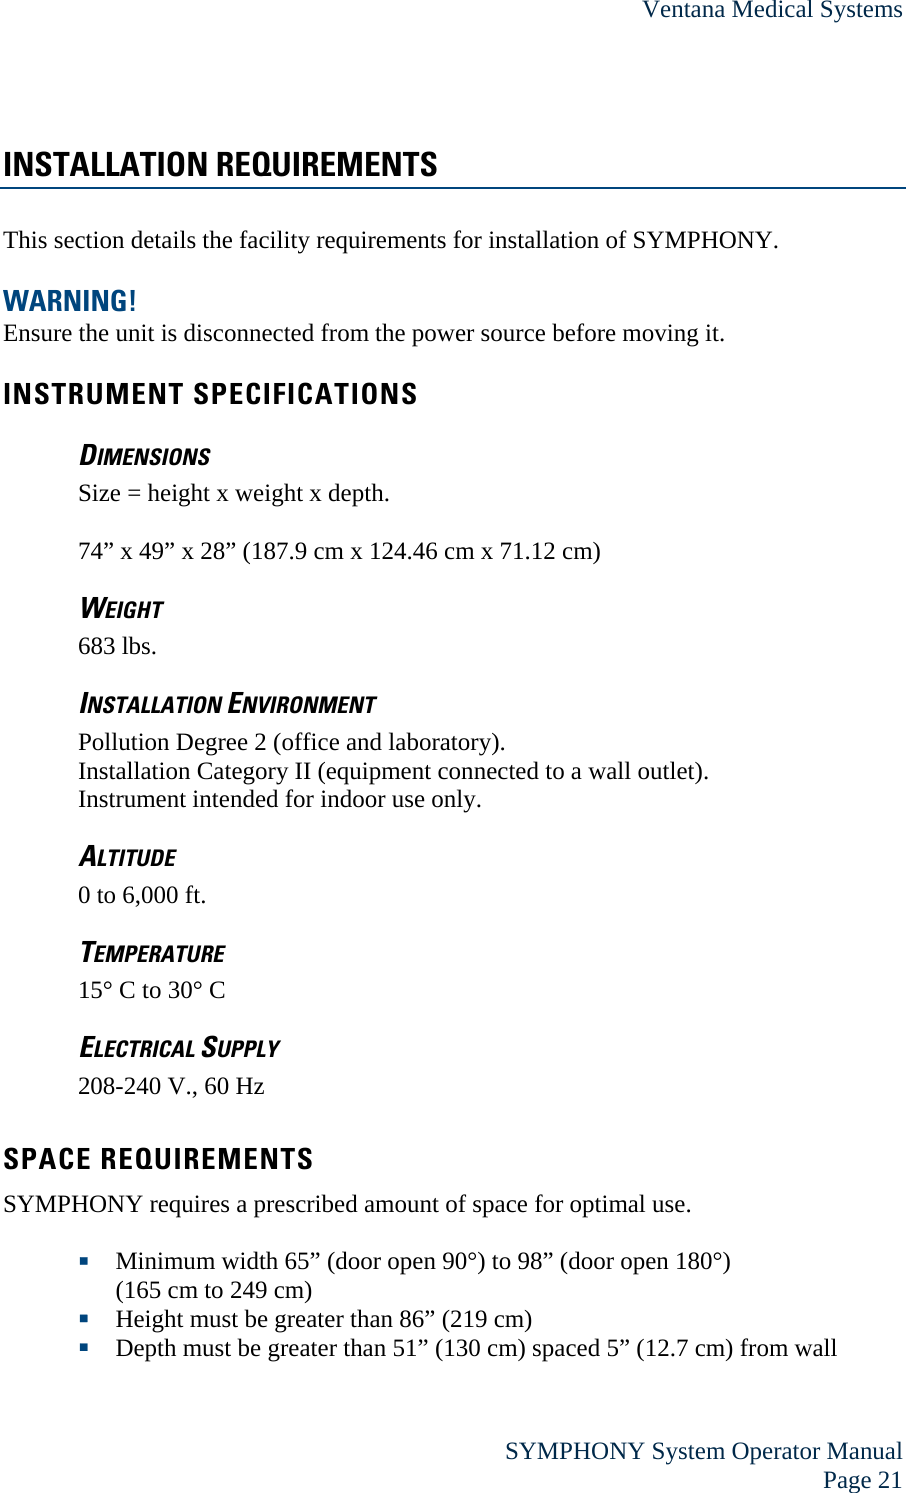 Ventana Medical Systems  SYMPHONY System Operator Manual Page 21 INSTALLATION REQUIREMENTS This section details the facility requirements for installation of SYMPHONY.  WARNING! Ensure the unit is disconnected from the power source before moving it.  INSTRUMENT SPECIFICATIONS DIMENSIONS Size = height x weight x depth.  74” x 49” x 28” (187.9 cm x 124.46 cm x 71.12 cm) WEIGHT 683 lbs.  INSTALLATION ENVIRONMENT Pollution Degree 2 (office and laboratory). Installation Category II (equipment connected to a wall outlet). Instrument intended for indoor use only. ALTITUDE 0 to 6,000 ft. TEMPERATURE 15° C to 30° C ELECTRICAL SUPPLY 208-240 V., 60 Hz  SPACE REQUIREMENTS SYMPHONY requires a prescribed amount of space for optimal use.   Minimum width 65” (door open 90°) to 98” (door open 180°)  (165 cm to 249 cm)  Height must be greater than 86” (219 cm)  Depth must be greater than 51” (130 cm) spaced 5” (12.7 cm) from wall 